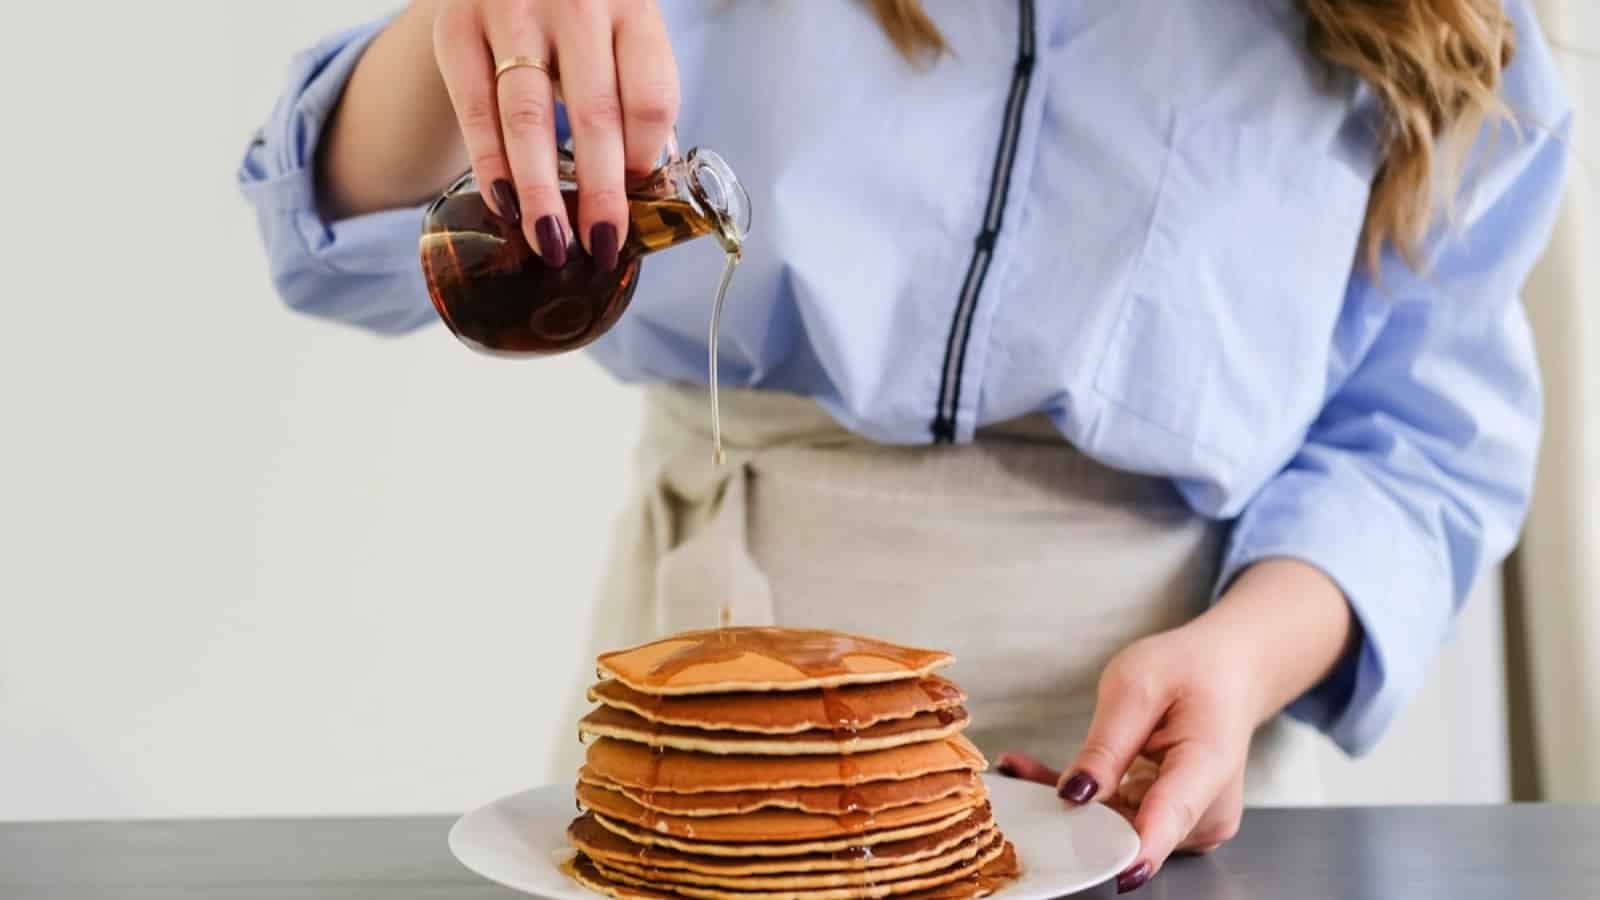 A woman pouring syrup on a stack of pancakes.